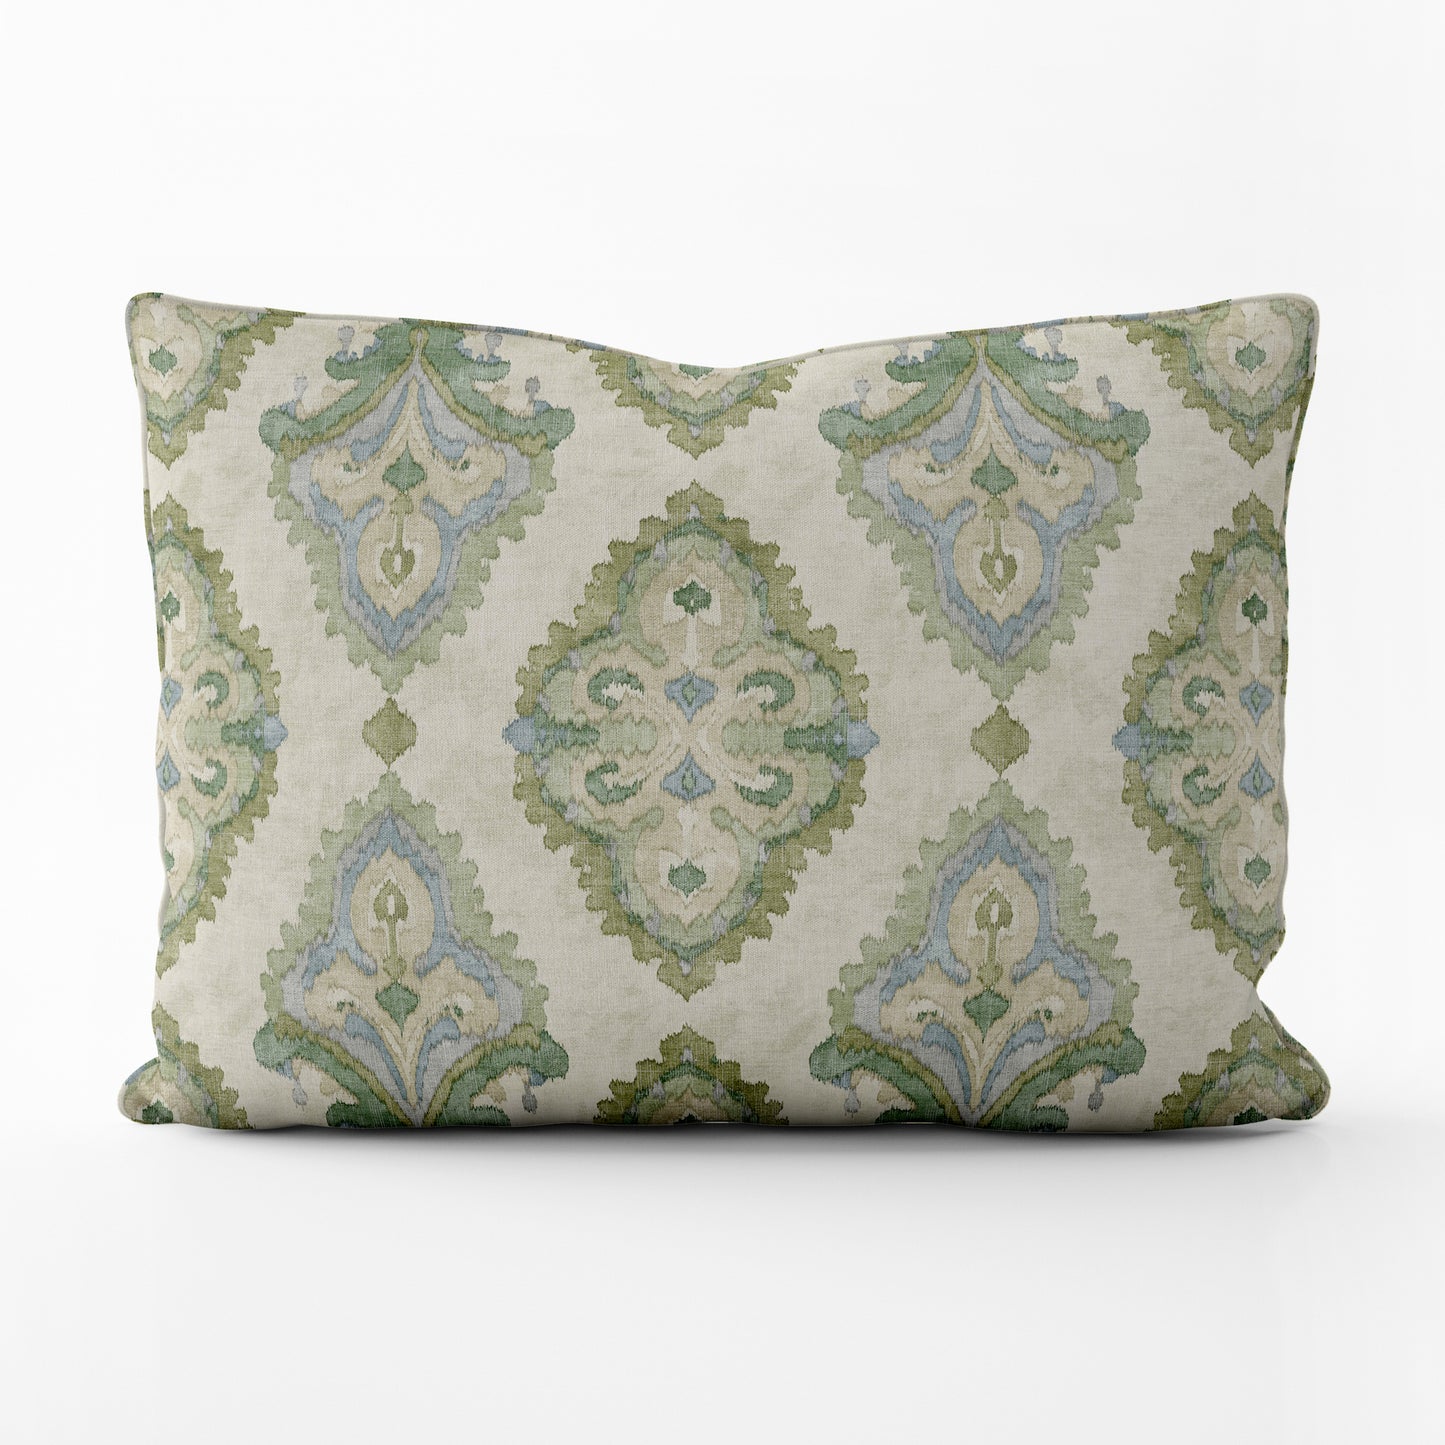 Decorative Pillows in Queen Bay Green, Blue Medallion Watercolor- Large Scale